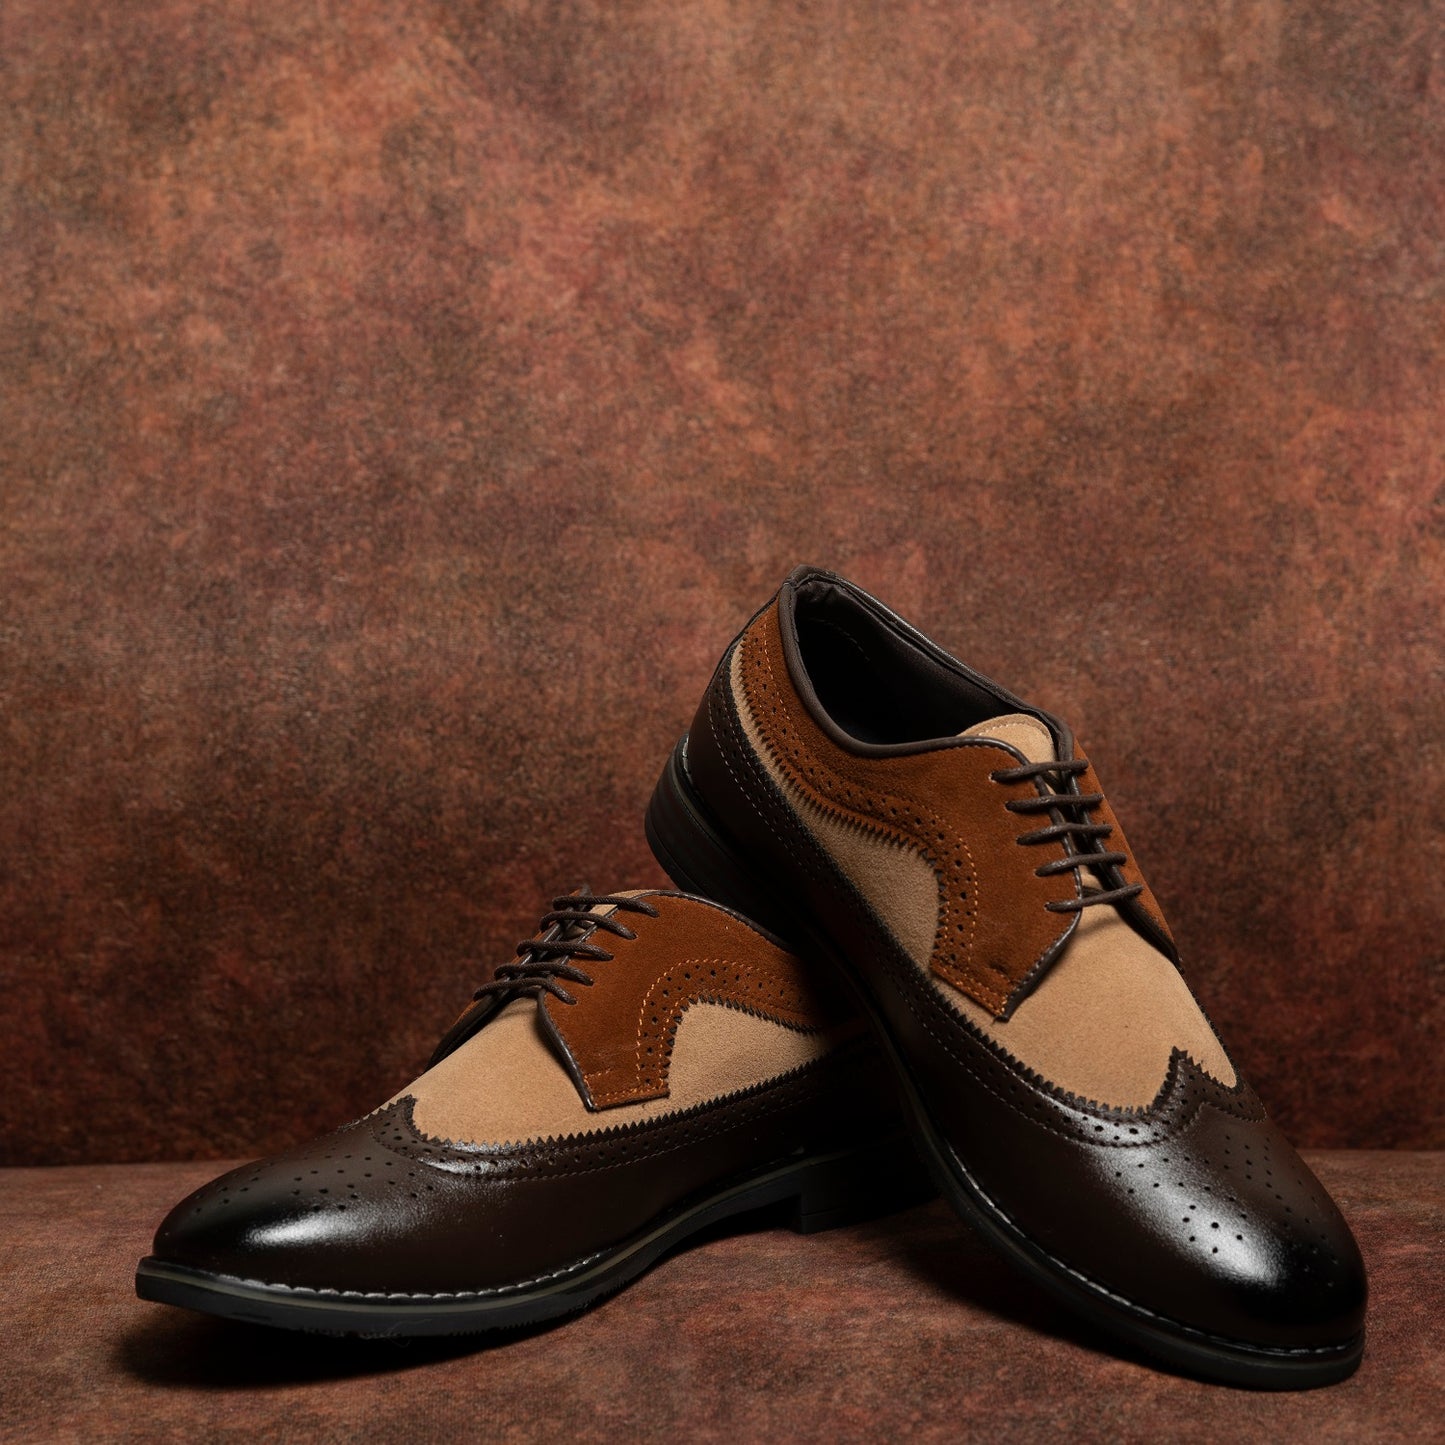 The Aurous Rogue Laceup Semi-Formal Brogues With Wingtips